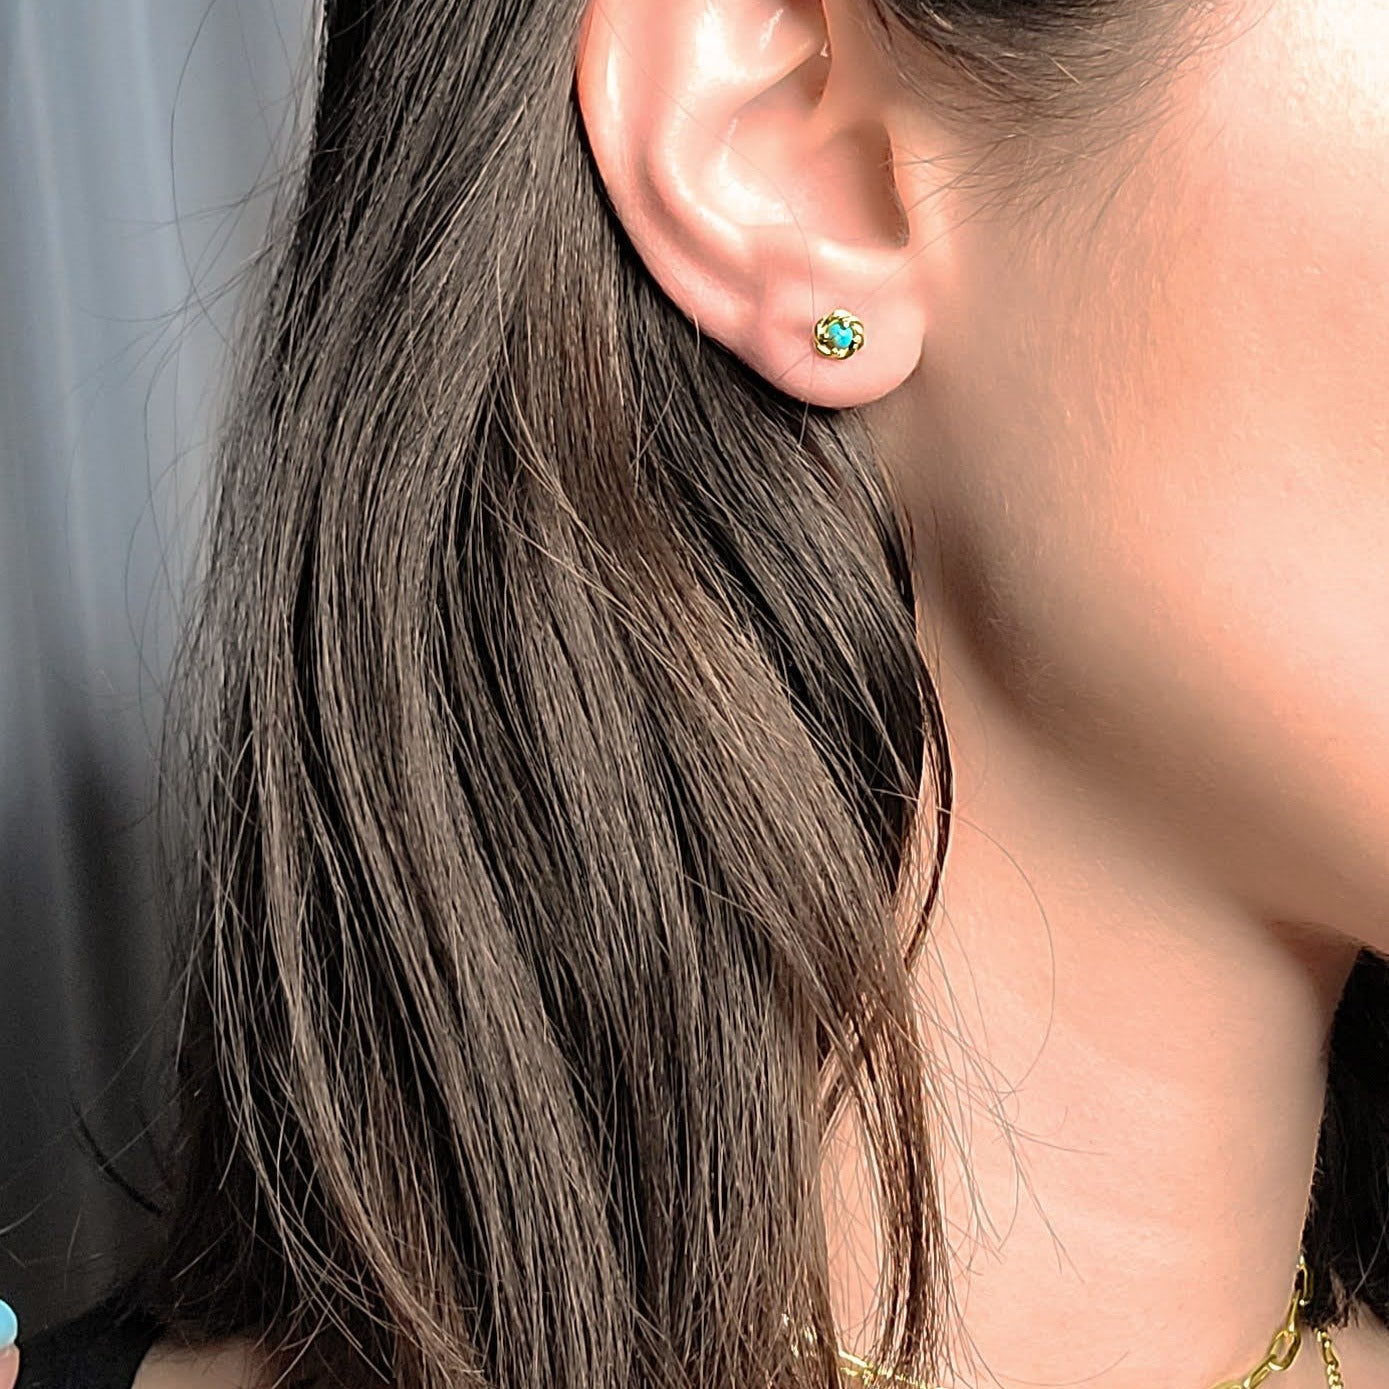 Woman wearing Turquoise studs